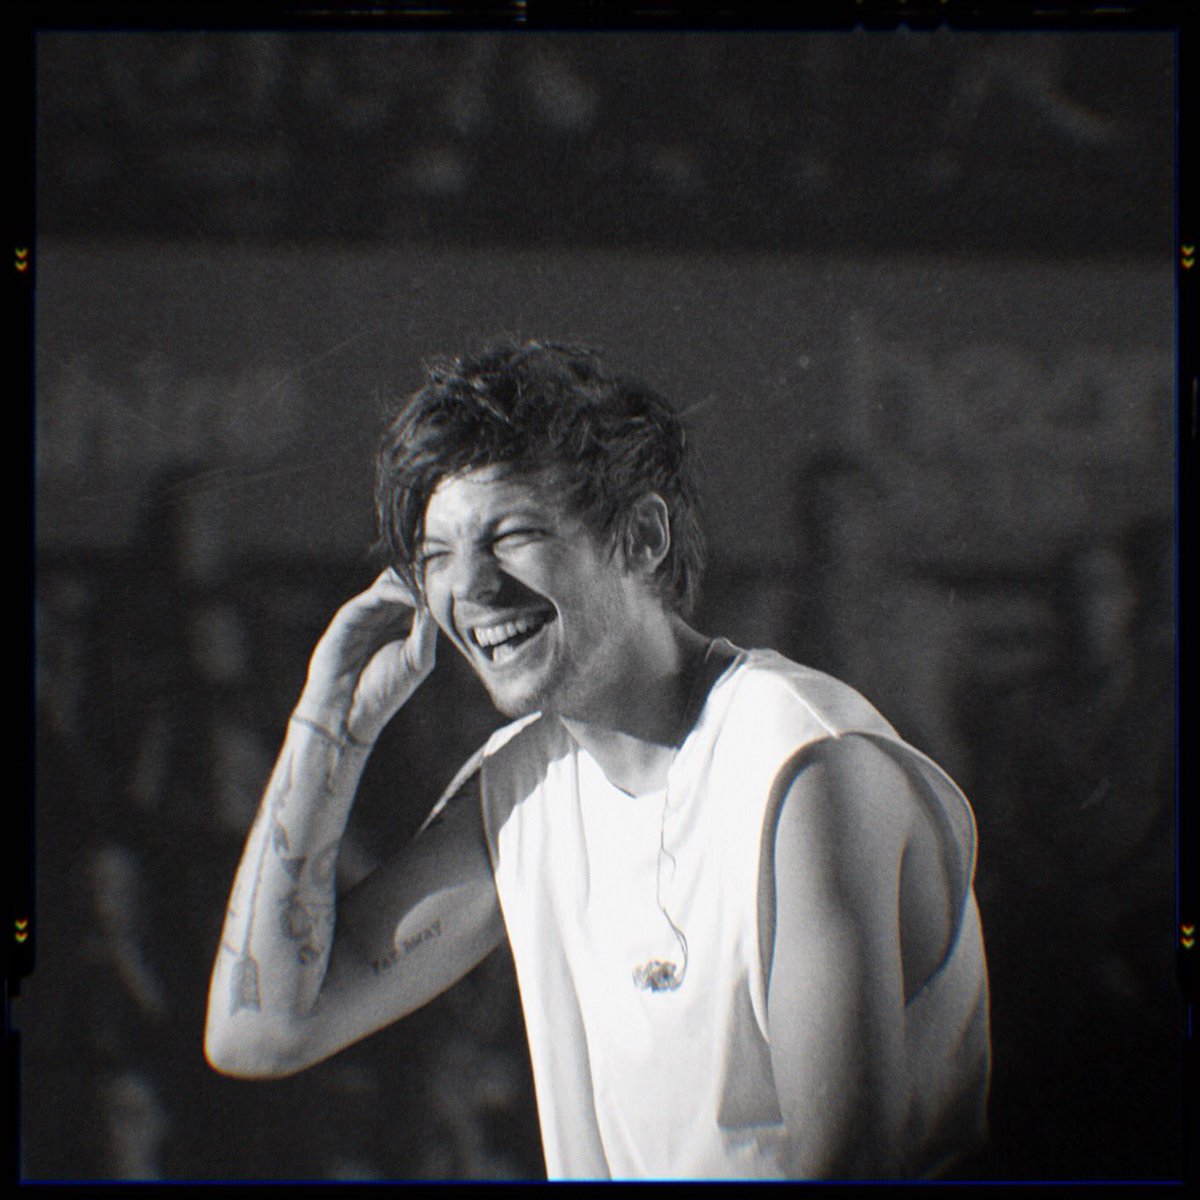 170 DAYS TO GOI say this a lot but I’m proud of the fact Louis went back to his roots for his sound. You can hear every single emotion that Louis wants to portray, connecting to us on a deeper level!! He’s an extremely passionate singer songwriter who works incredibly hard.